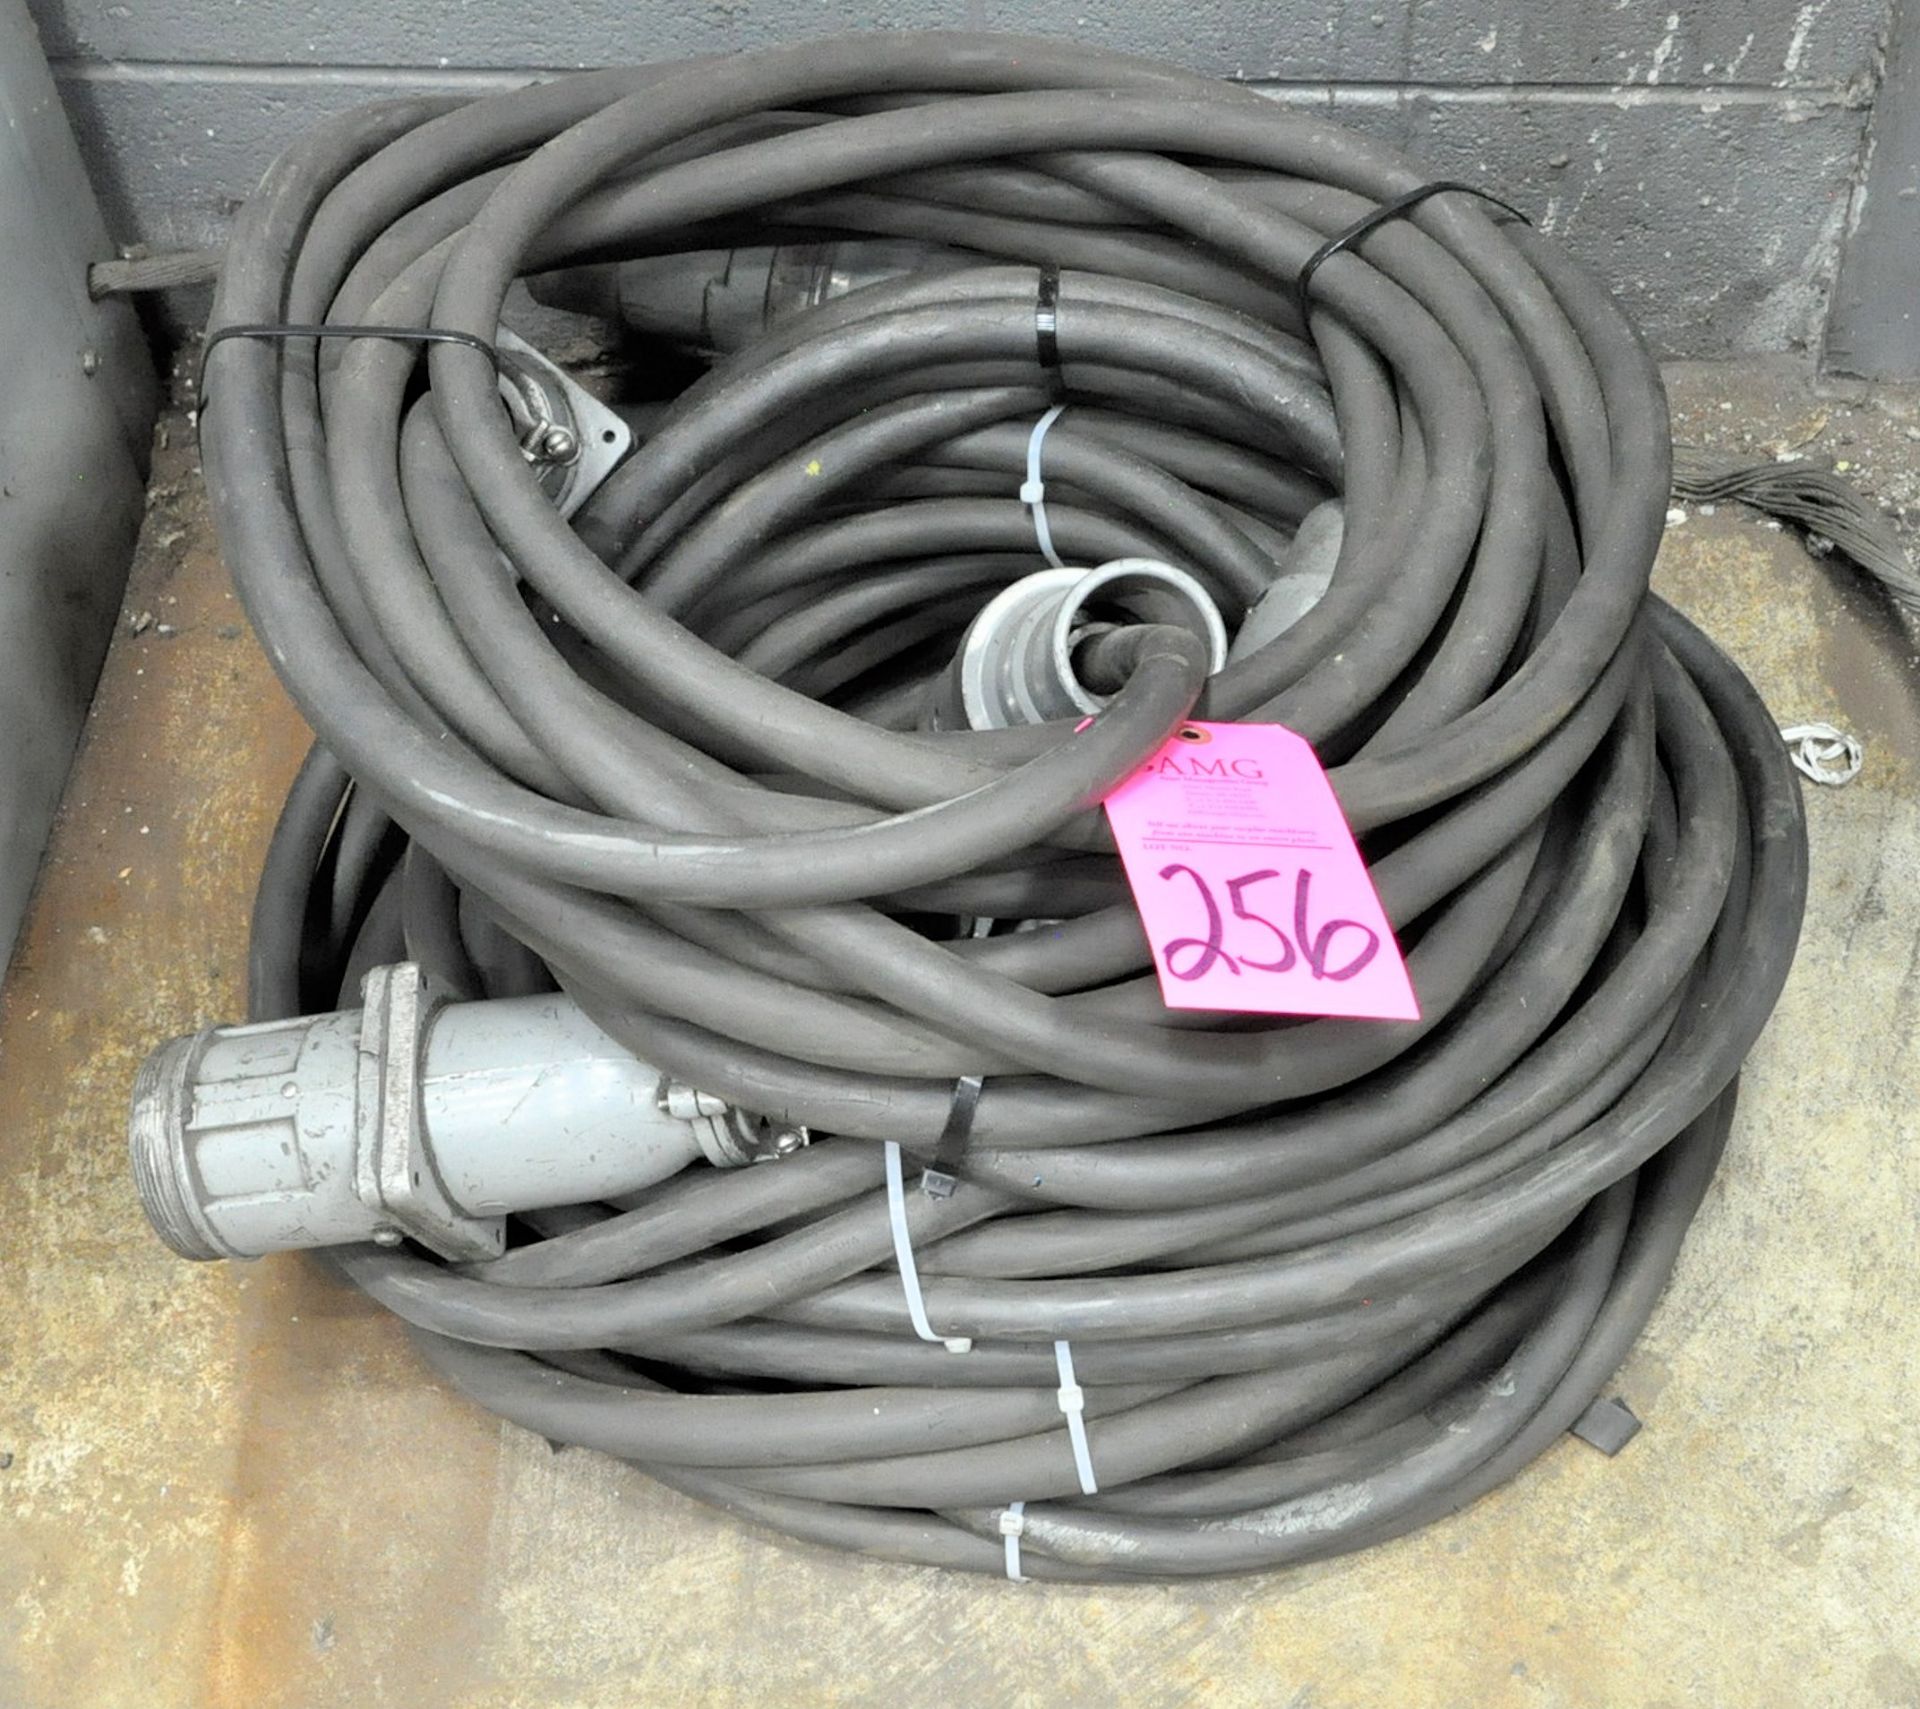 Lot-3 Phase Extension Power Cords in (1) Stack